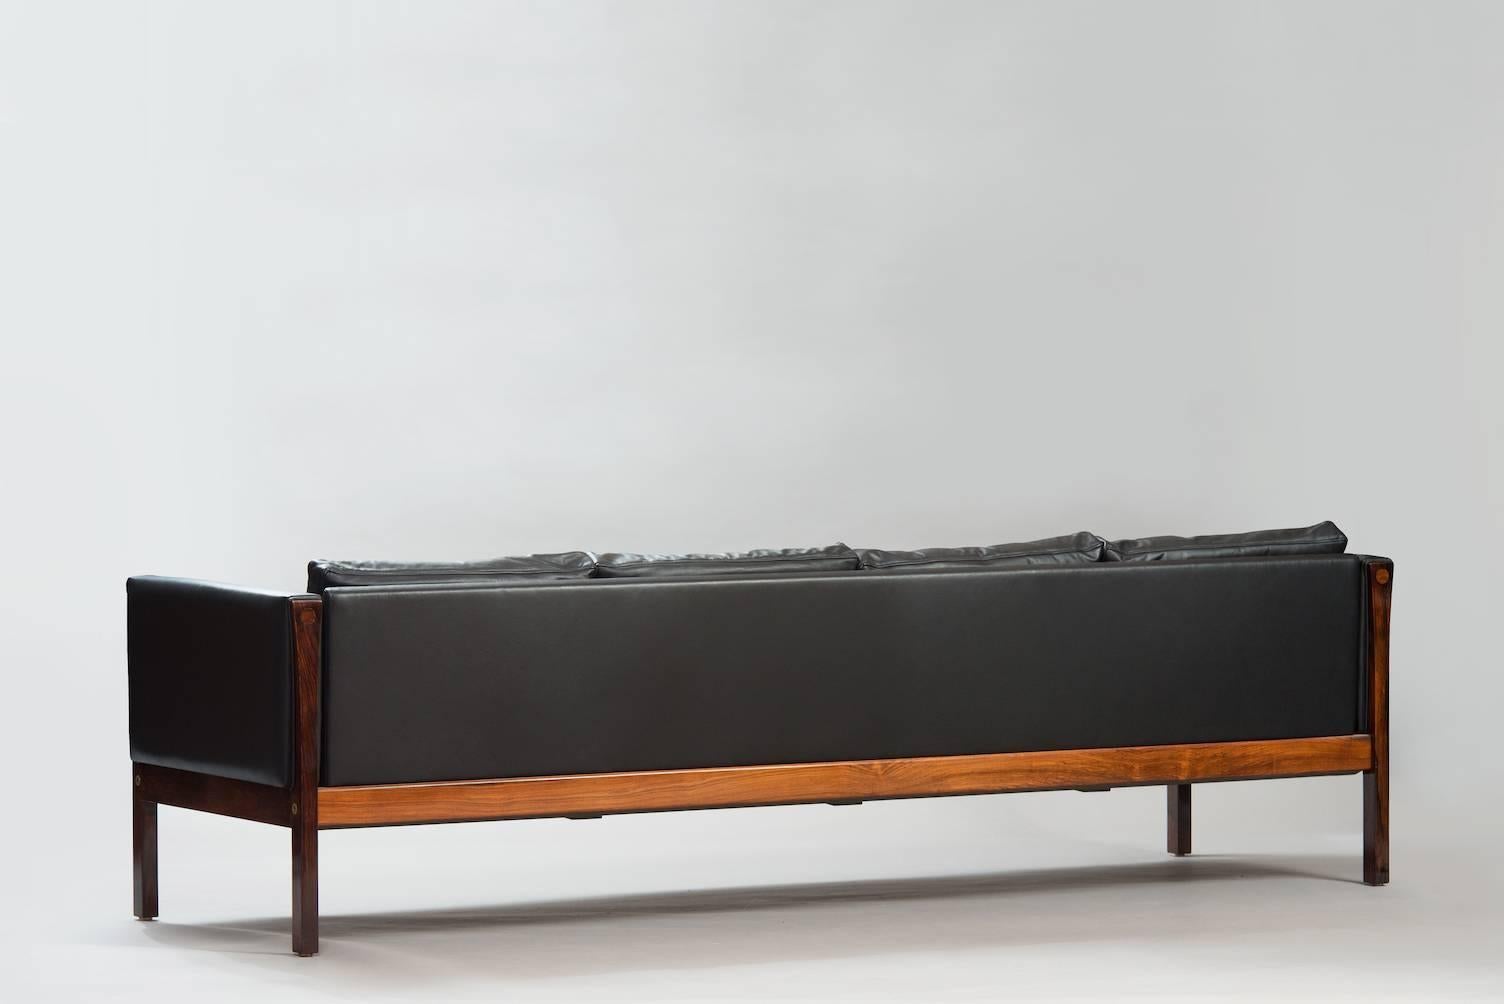 Four-seat sofa, model AP 62, in black leather and rosewood.
Bibliography: AP Stolen catalogue 1967 & Design from Denmark, 1965.